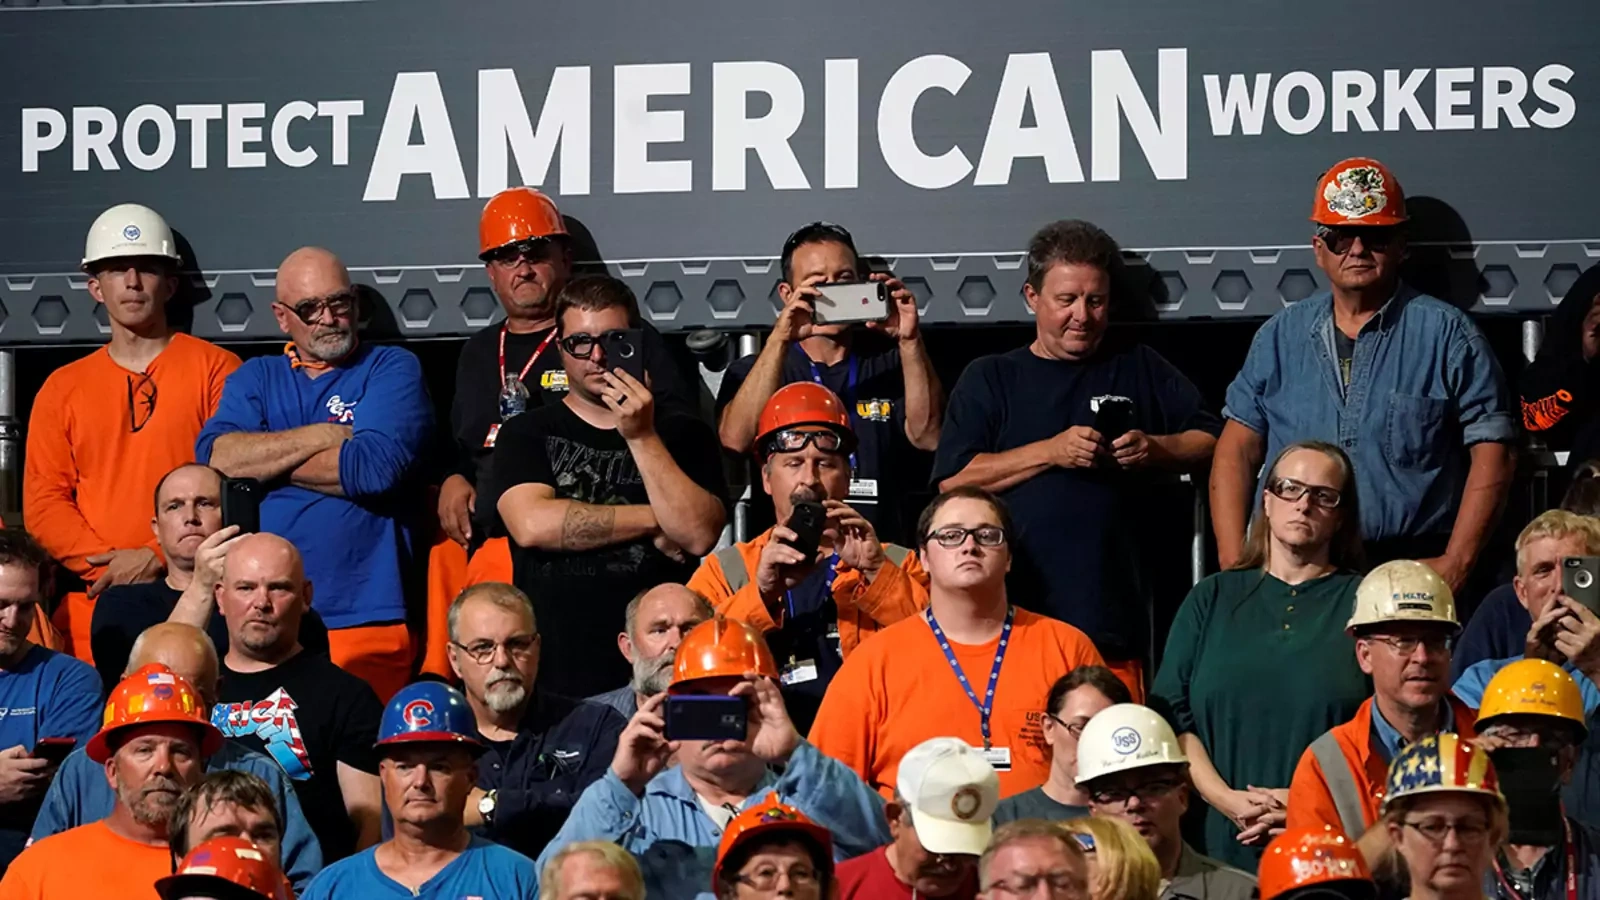 Steelworkers watch President Donald J. Trump speak about trade policy at a steel plant in Granite City, Illinois, on July 26, 2018.